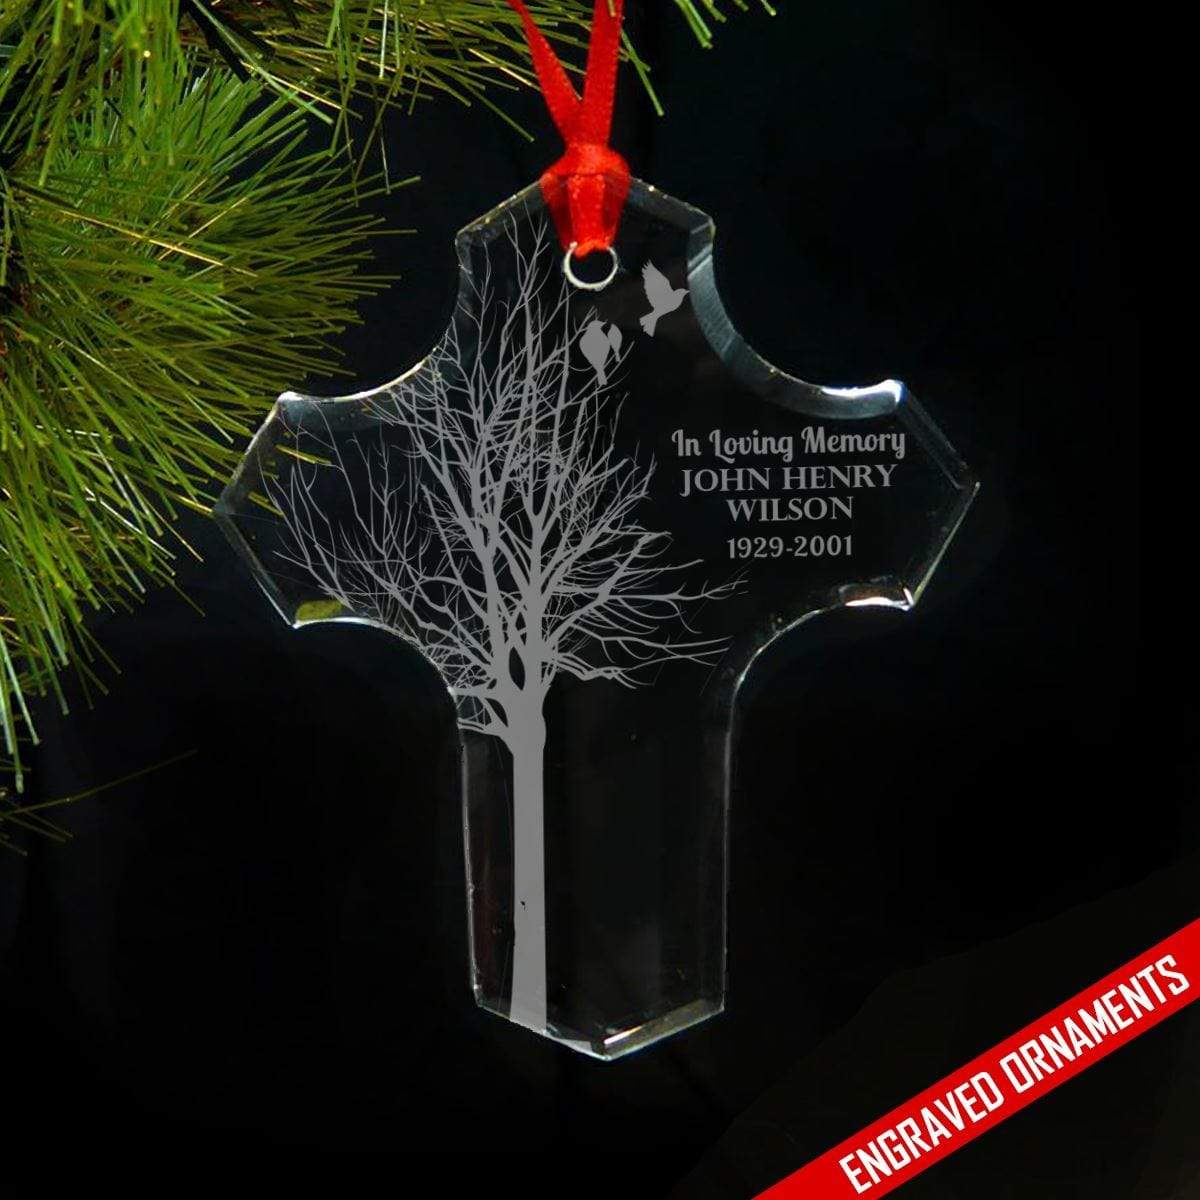 In Loving Memory Of PERSONALIZED Engraved Glass Ornament ZLAZER 